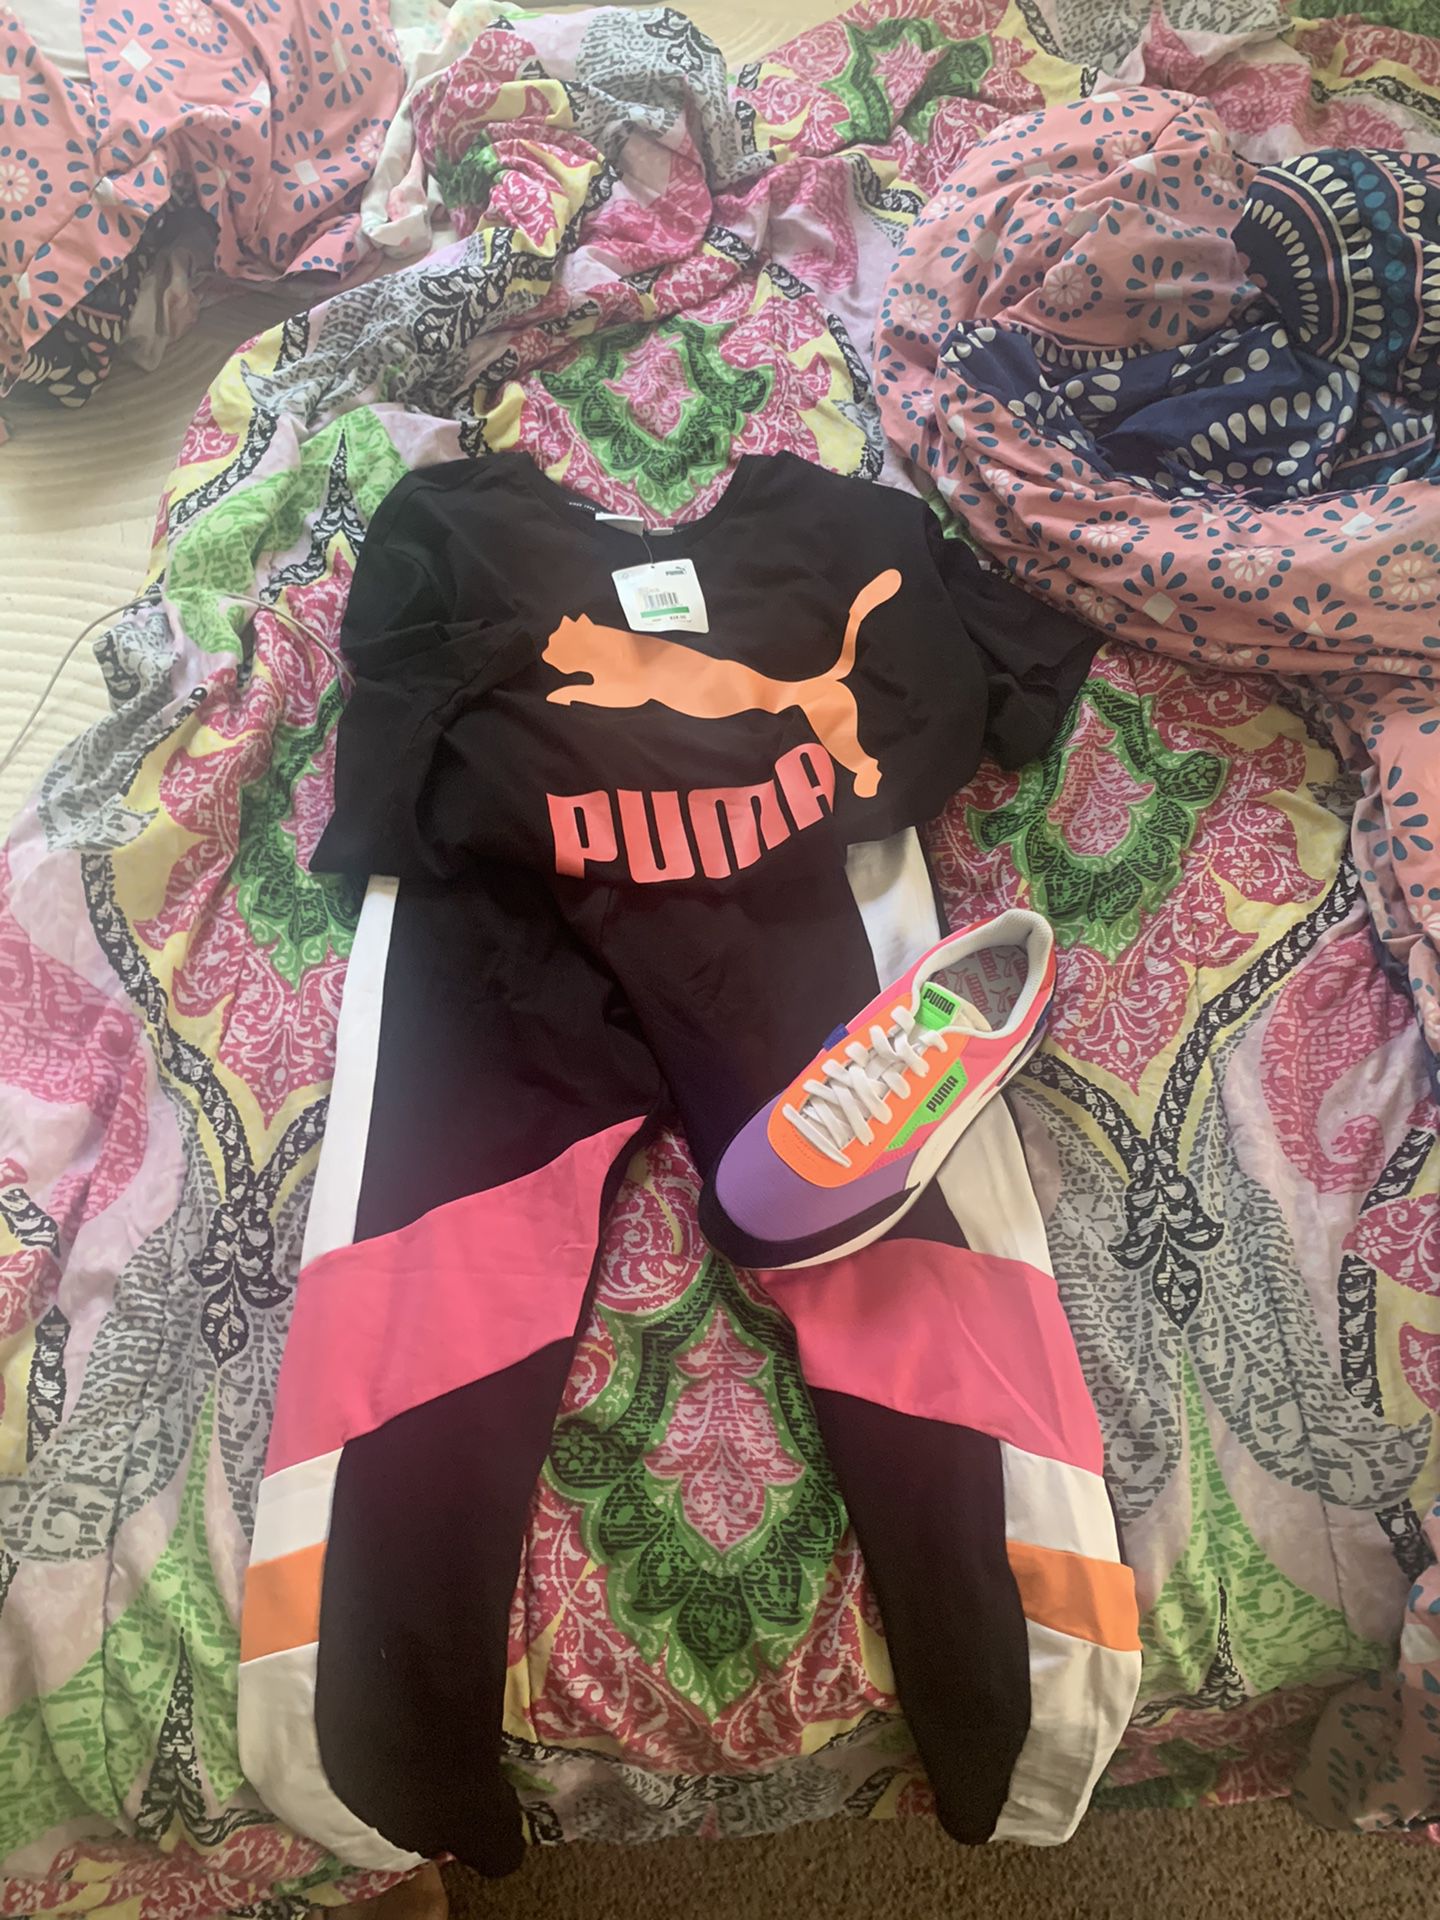 Puma 8 outfit large Nike fit $90